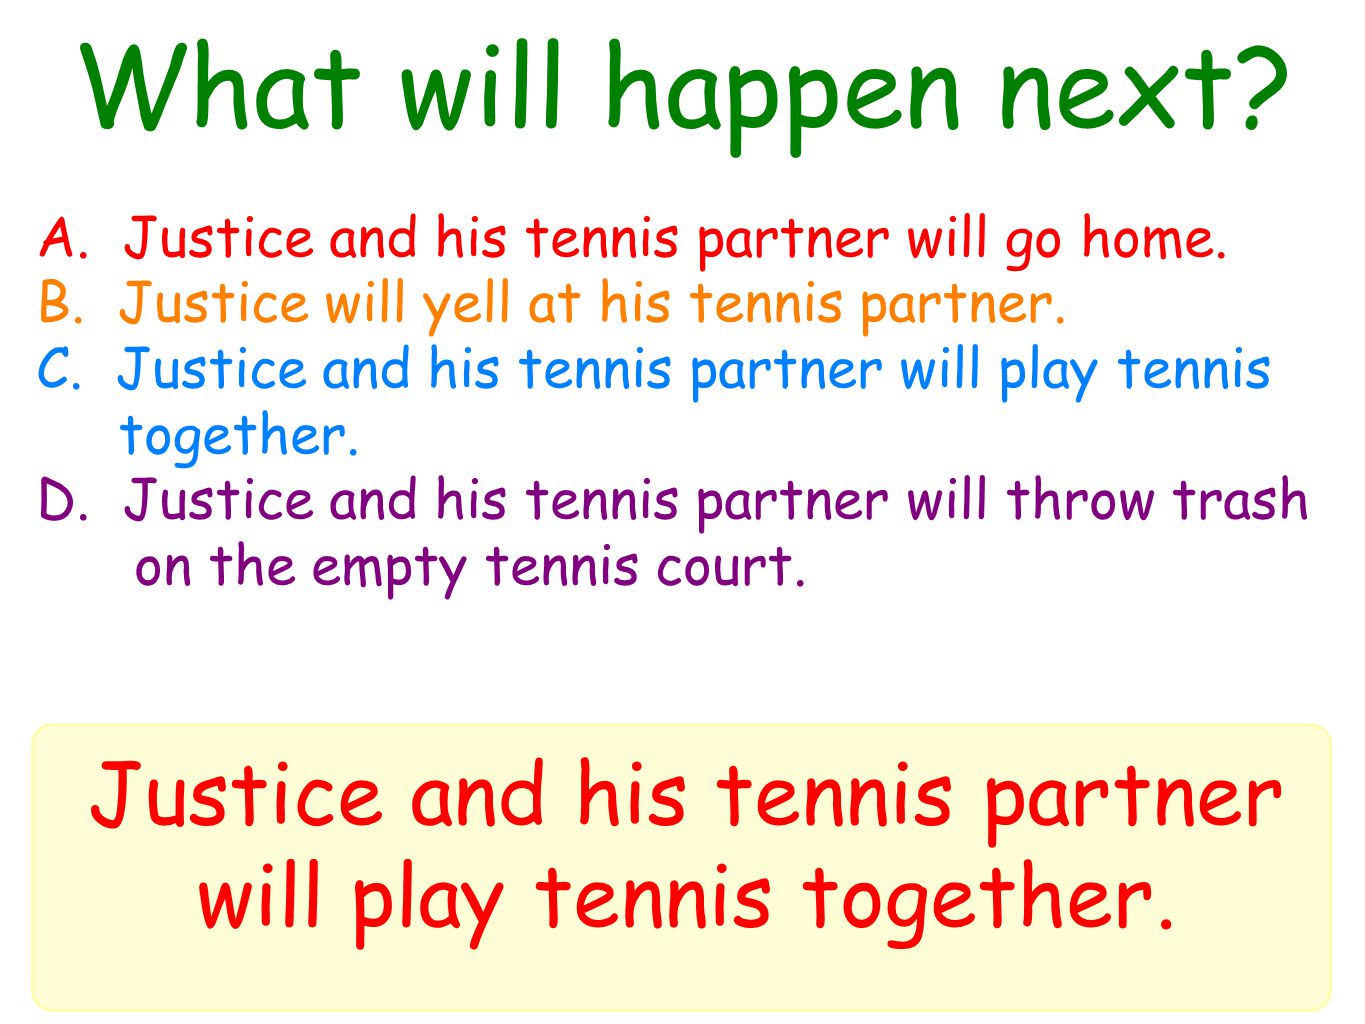 What will happen next. Justice and his tennis partner will play tennis together.